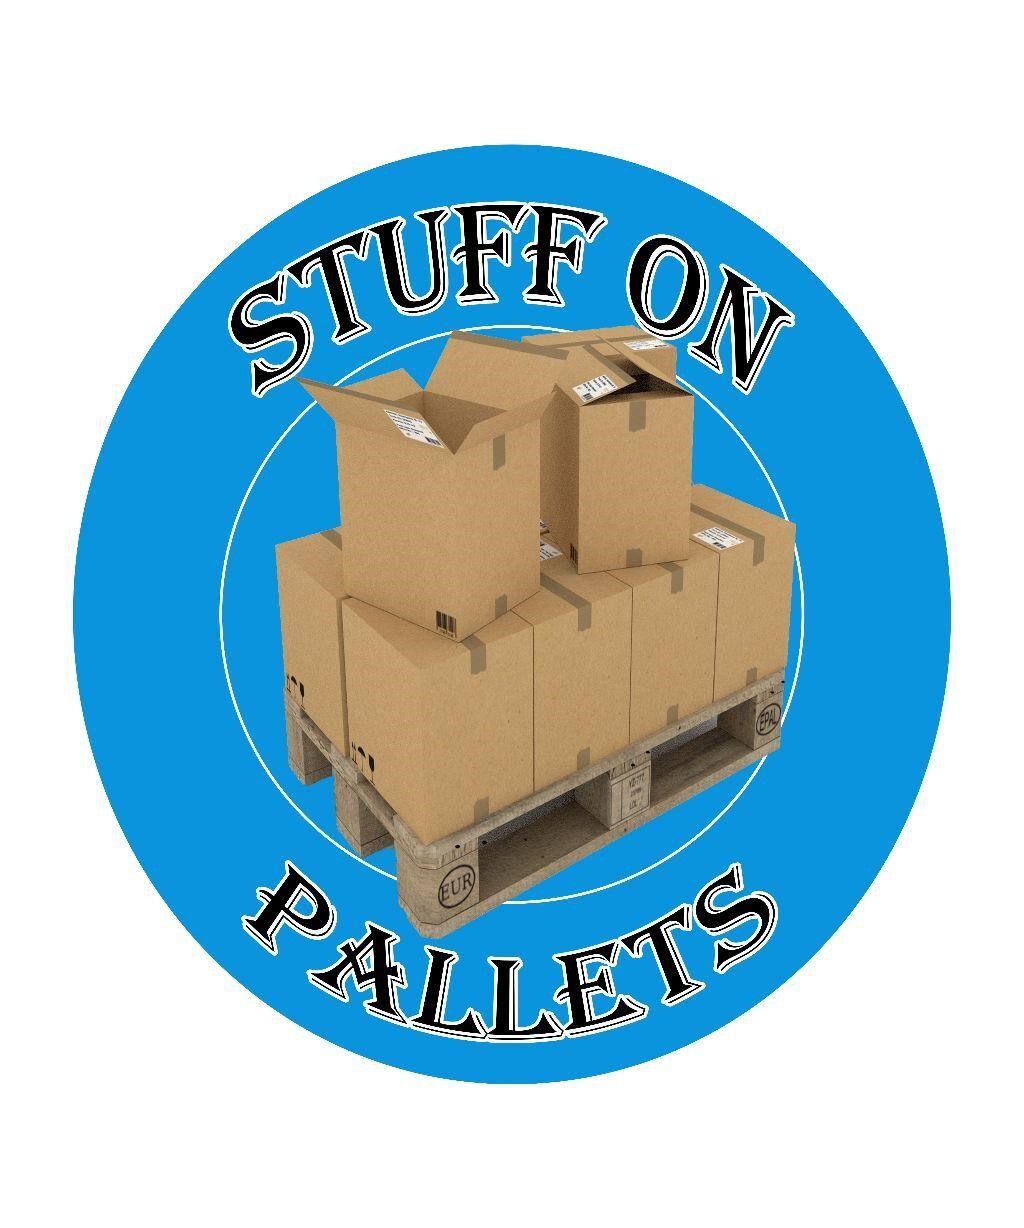 Toys, Board Games & Household Item (Shipping All Items)